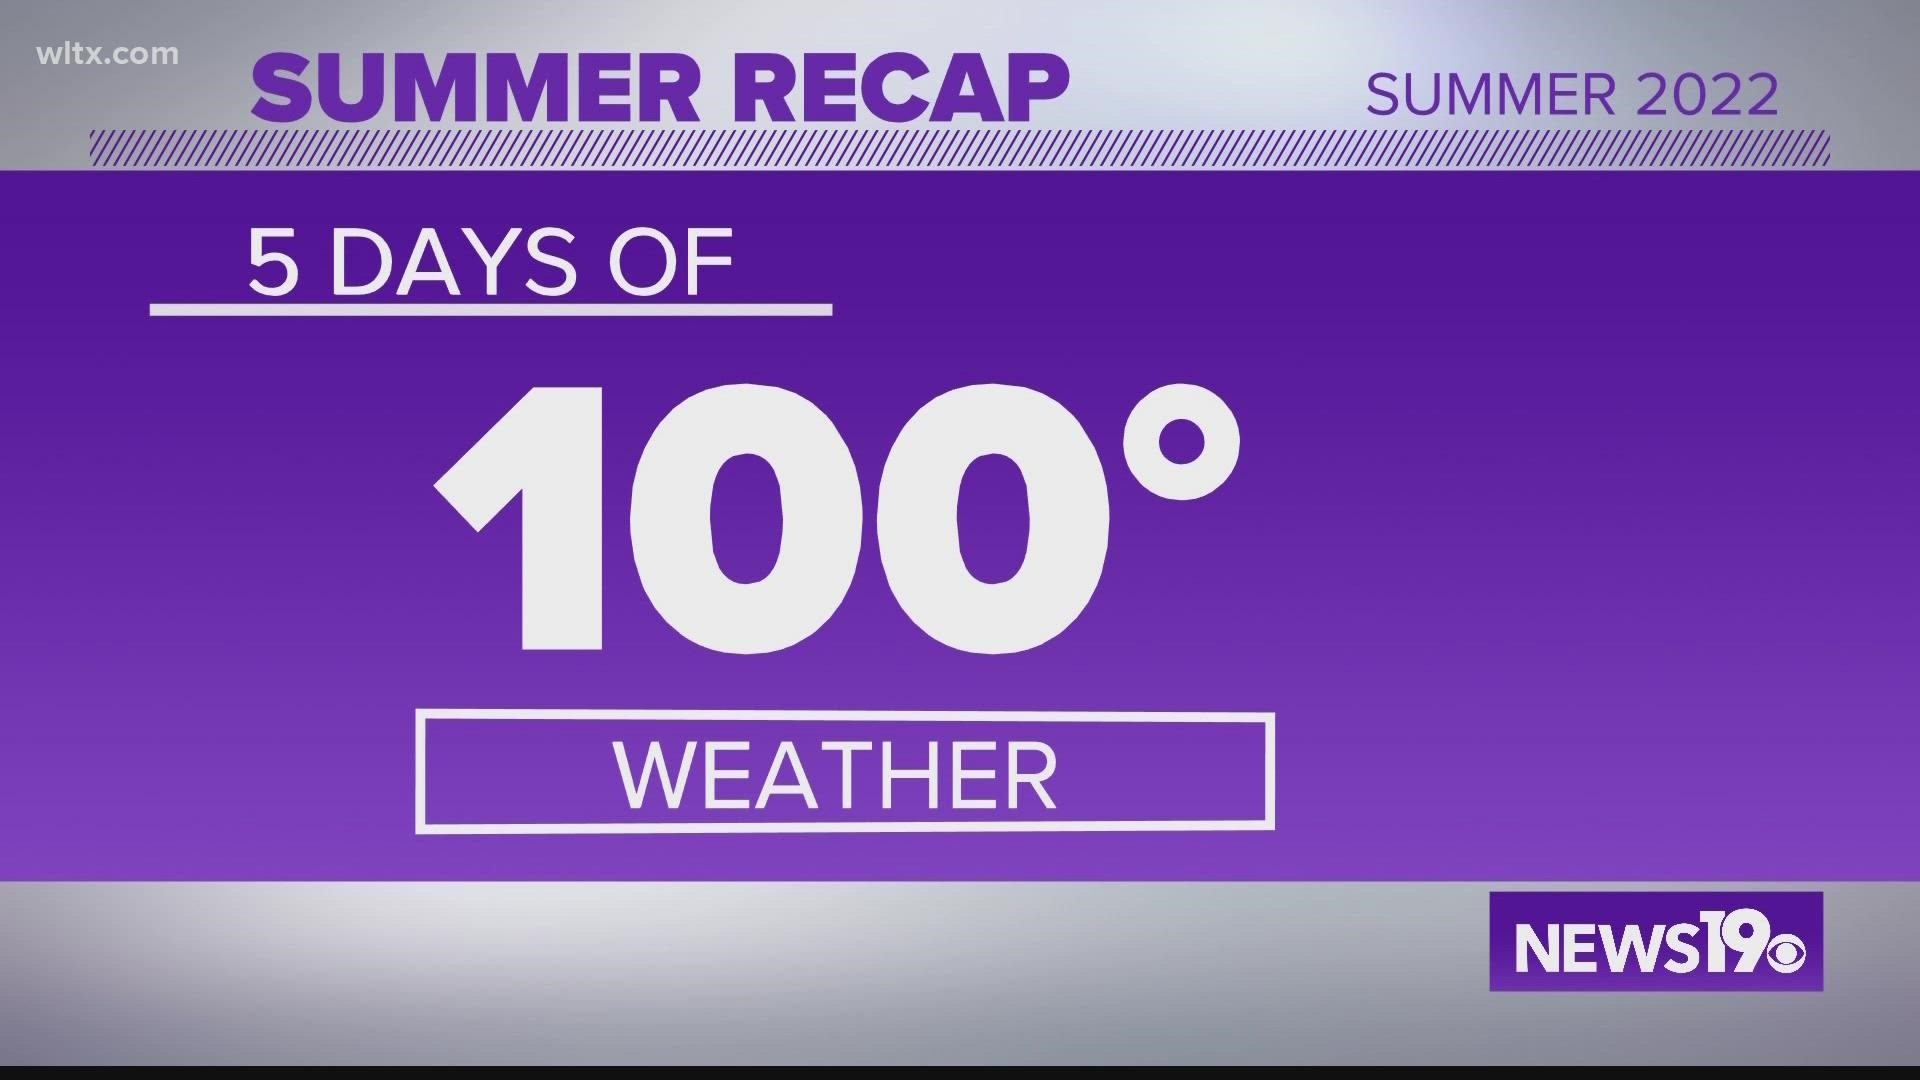 After some extreme heat, this Summer has cooled down quite a bit thanks to rain.